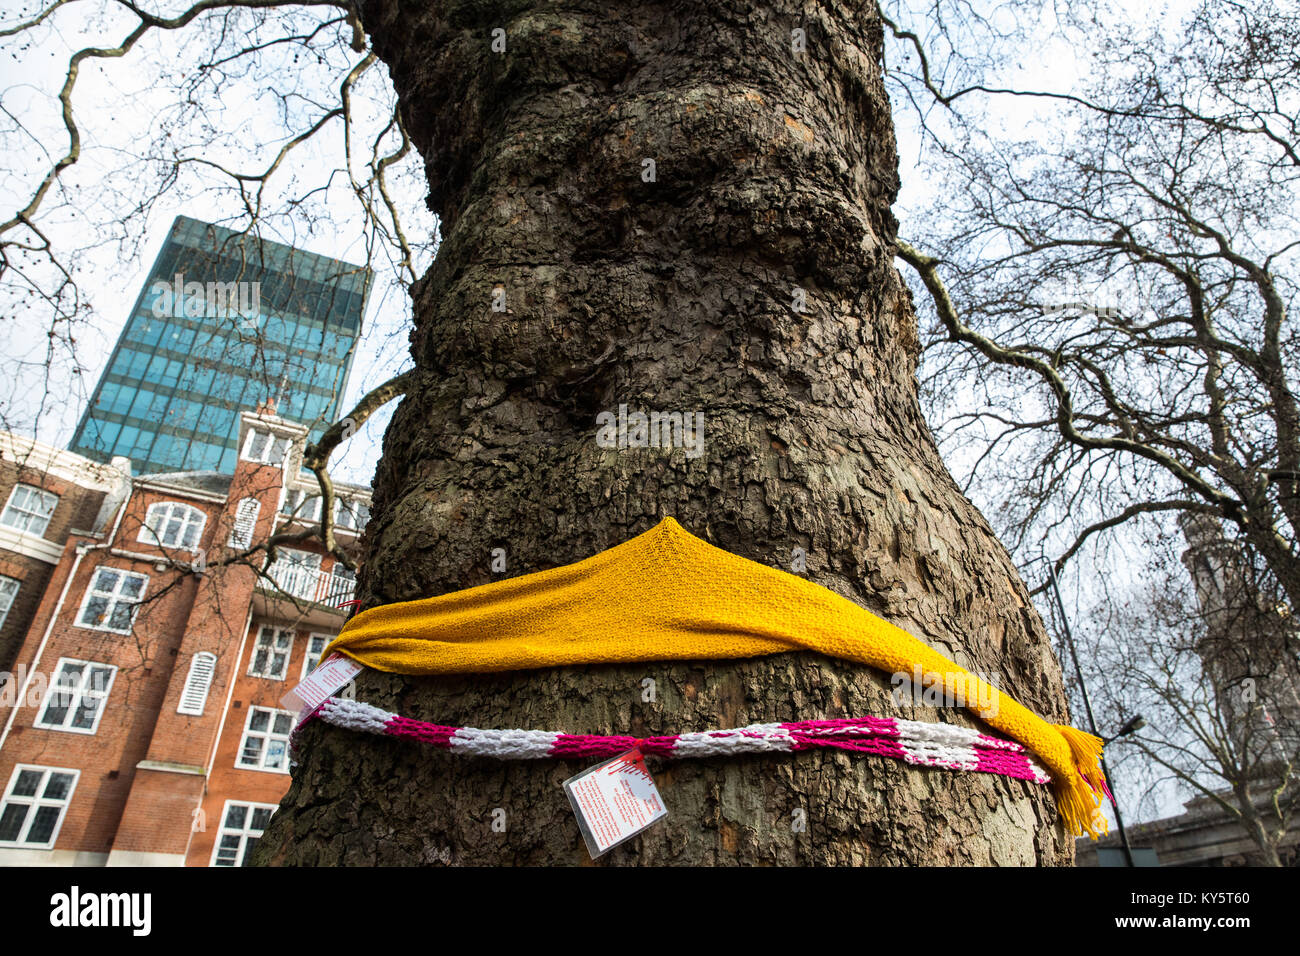 London, UK. 13th January, 2018. A large tree in Euston Square Gardens which is expected to be felled by HS2 Ltd. Mature London Plane, Red Oak, Common Lime, Common Whitebeam and Wild Service trees are to be felled at the front of Euston station to make way for temporary sites for construction vehicles and a displaced taxi rank as part of preparations for the HS2 rail line. Many of the trees have been 'yarn-bombed', wrapped with hand-knitted scarves to draw attention to their fate. Credit: Mark Kerrison/Alamy Live News Stock Photo